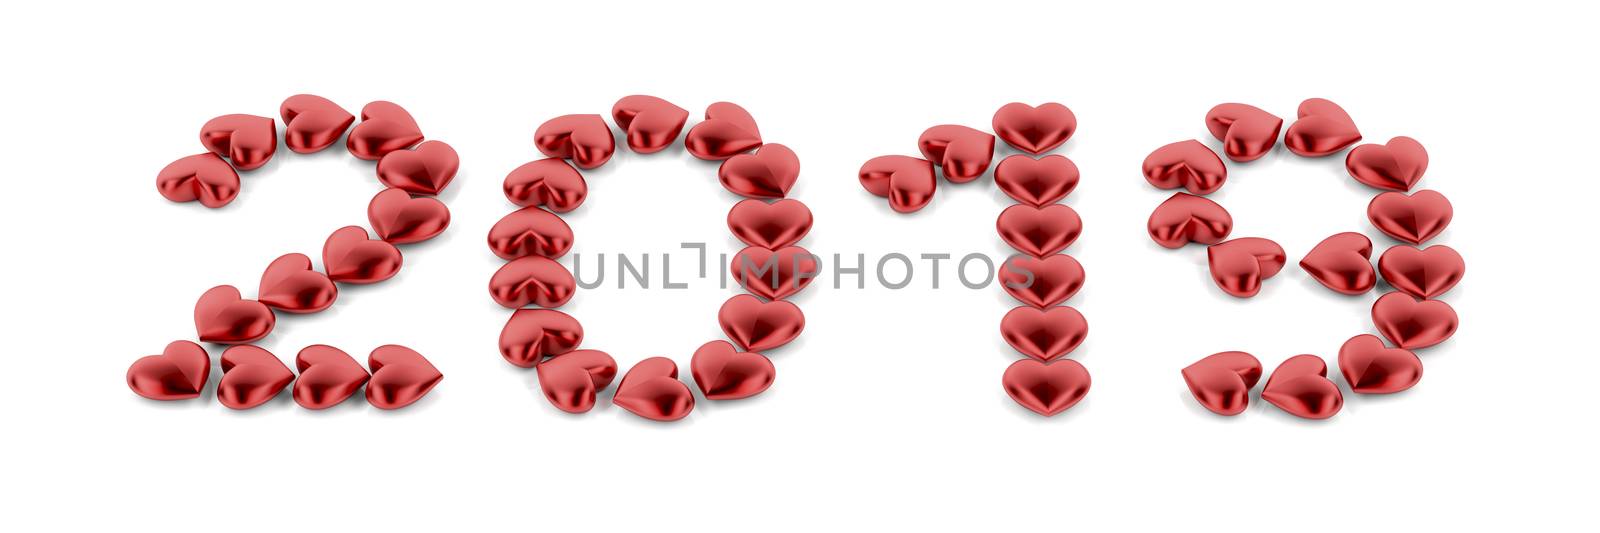 Happy new year 2019 with red hearts by magraphics